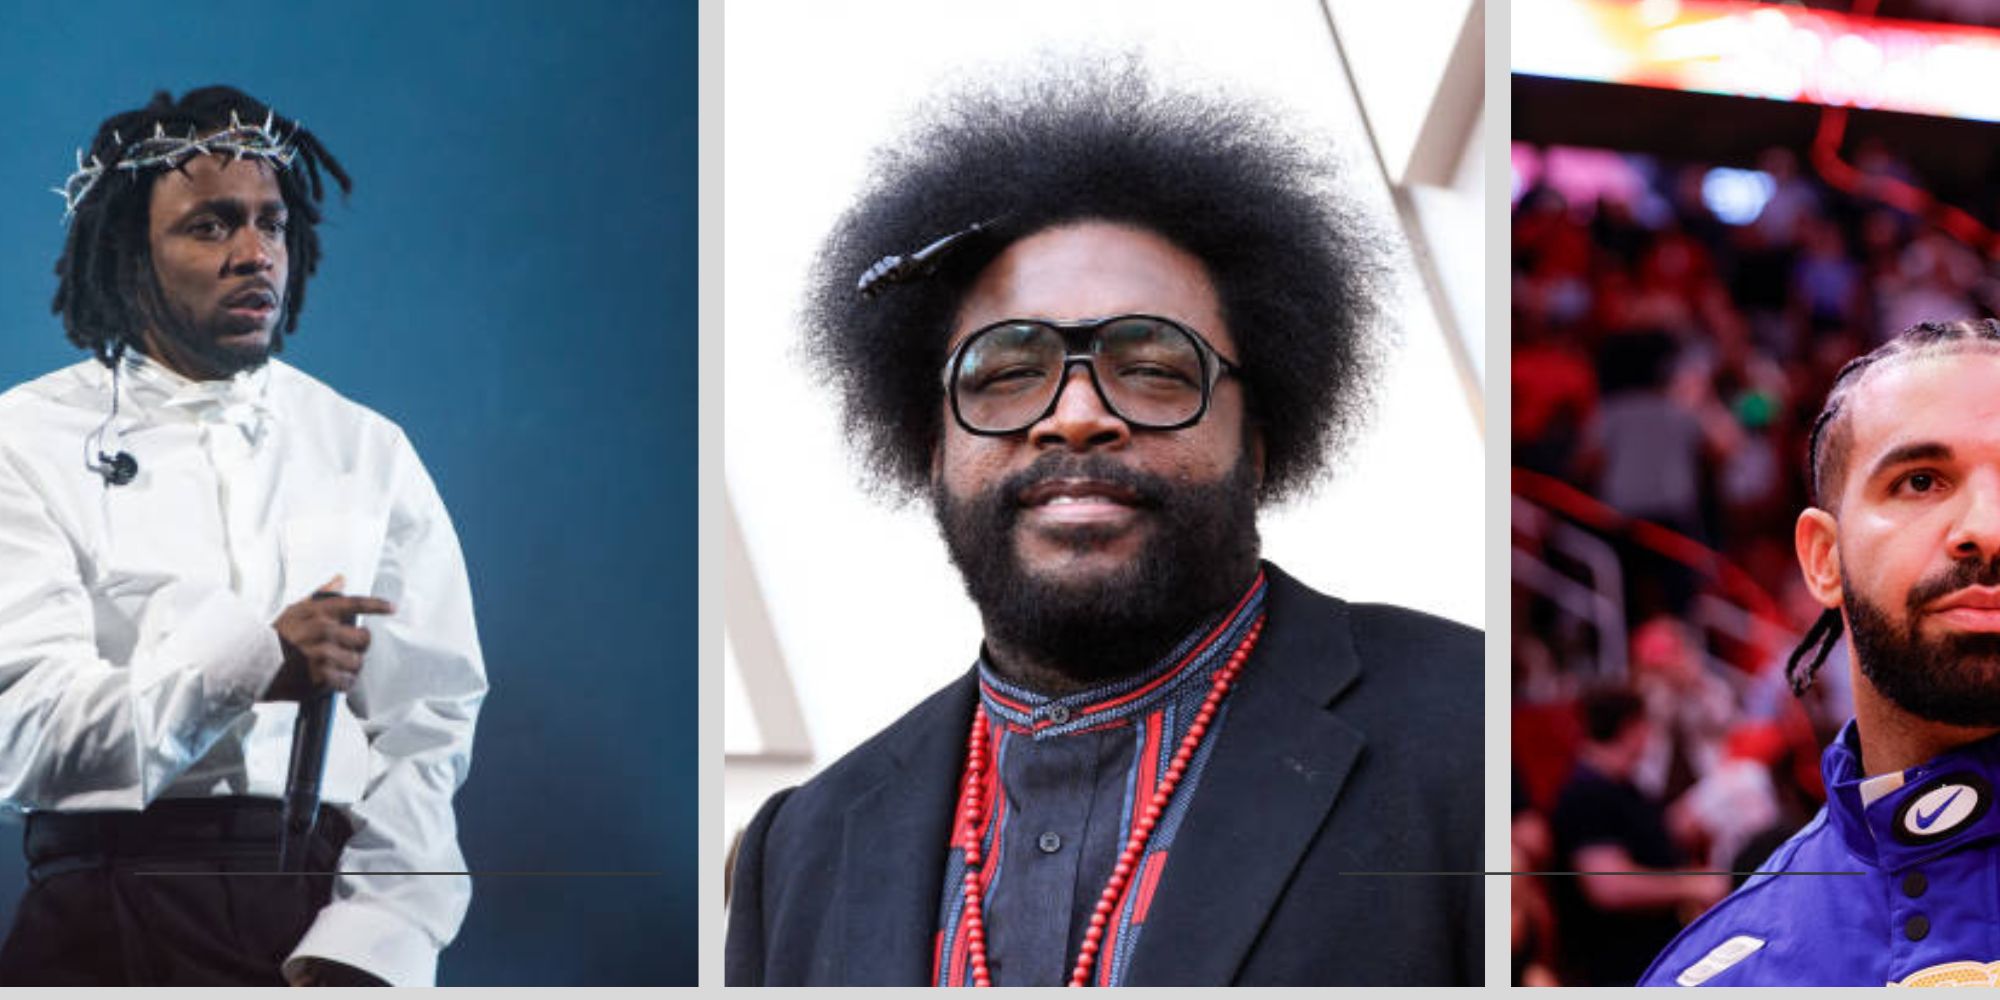 Questlove Slams Kendrick Lamar and Drake For Dragging Family Into Their Beef: “Hip Hop Is Truly Dead”